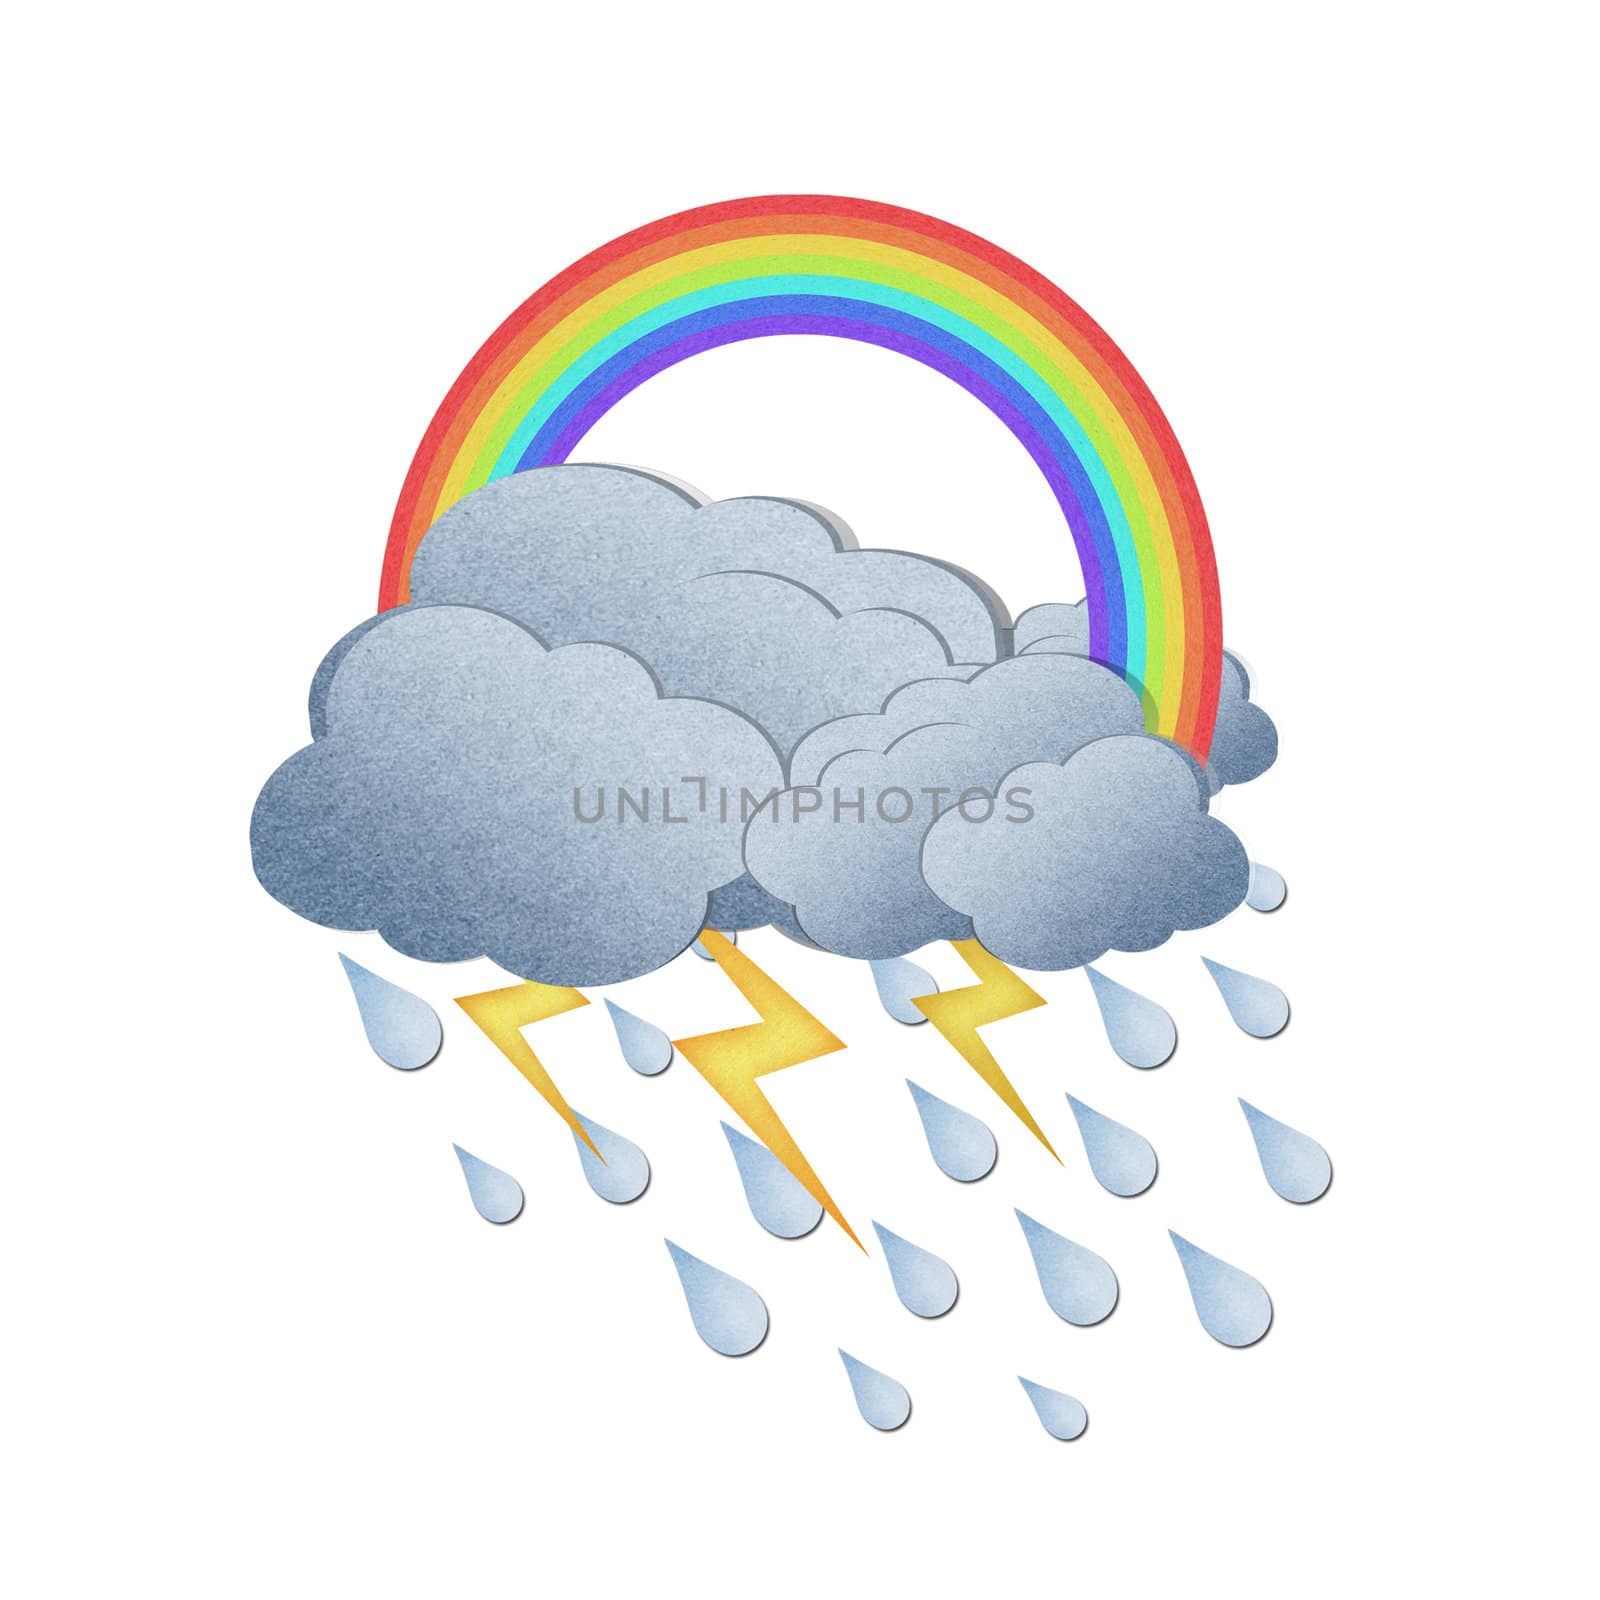  Grunge recycled paper rainbow with rain on white background